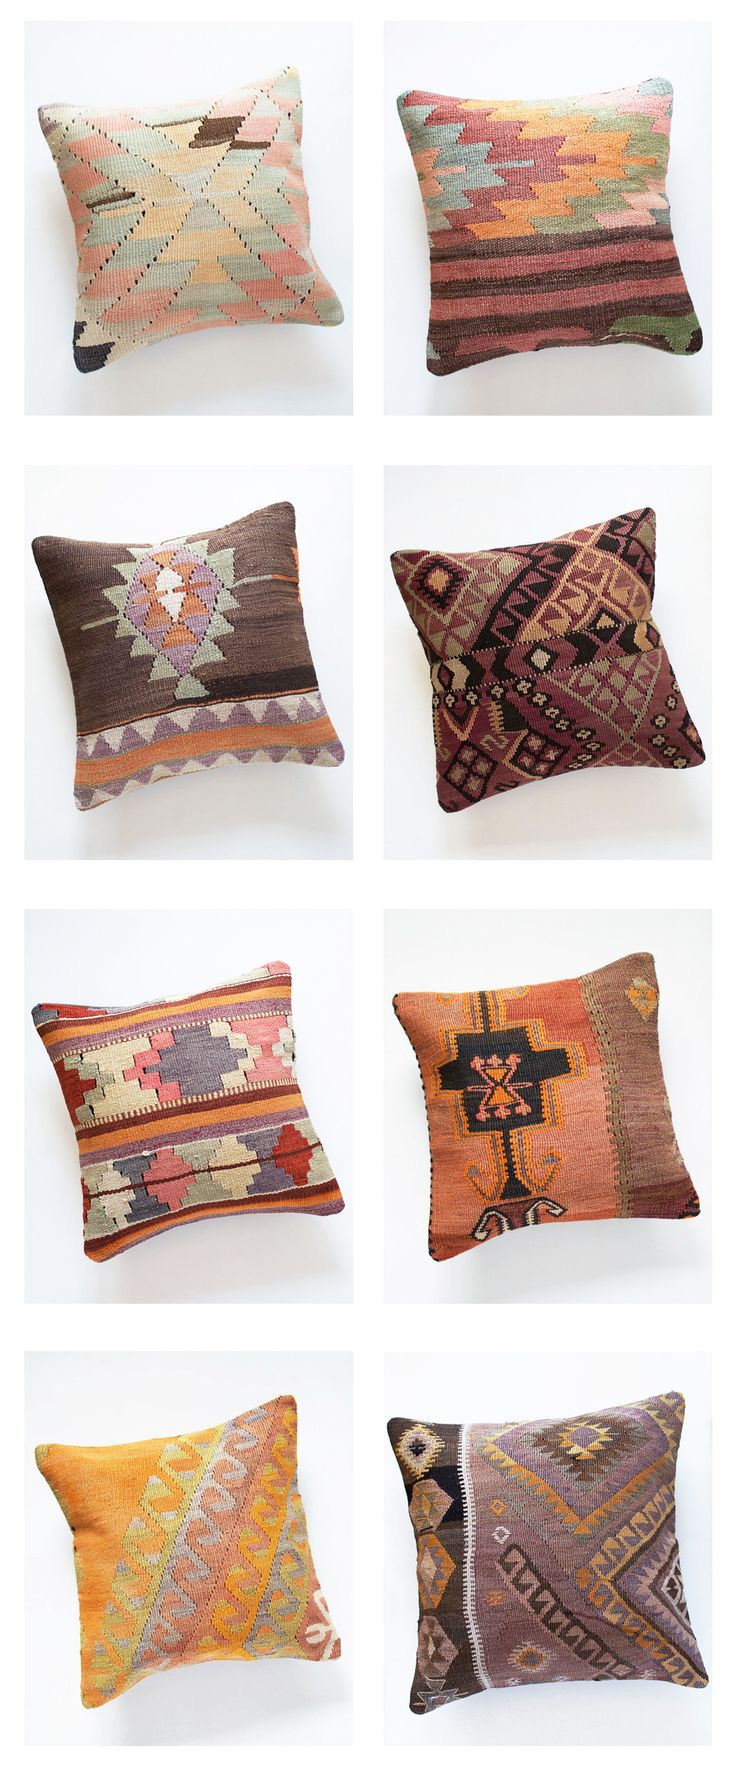 the best place to buy kilim pillows